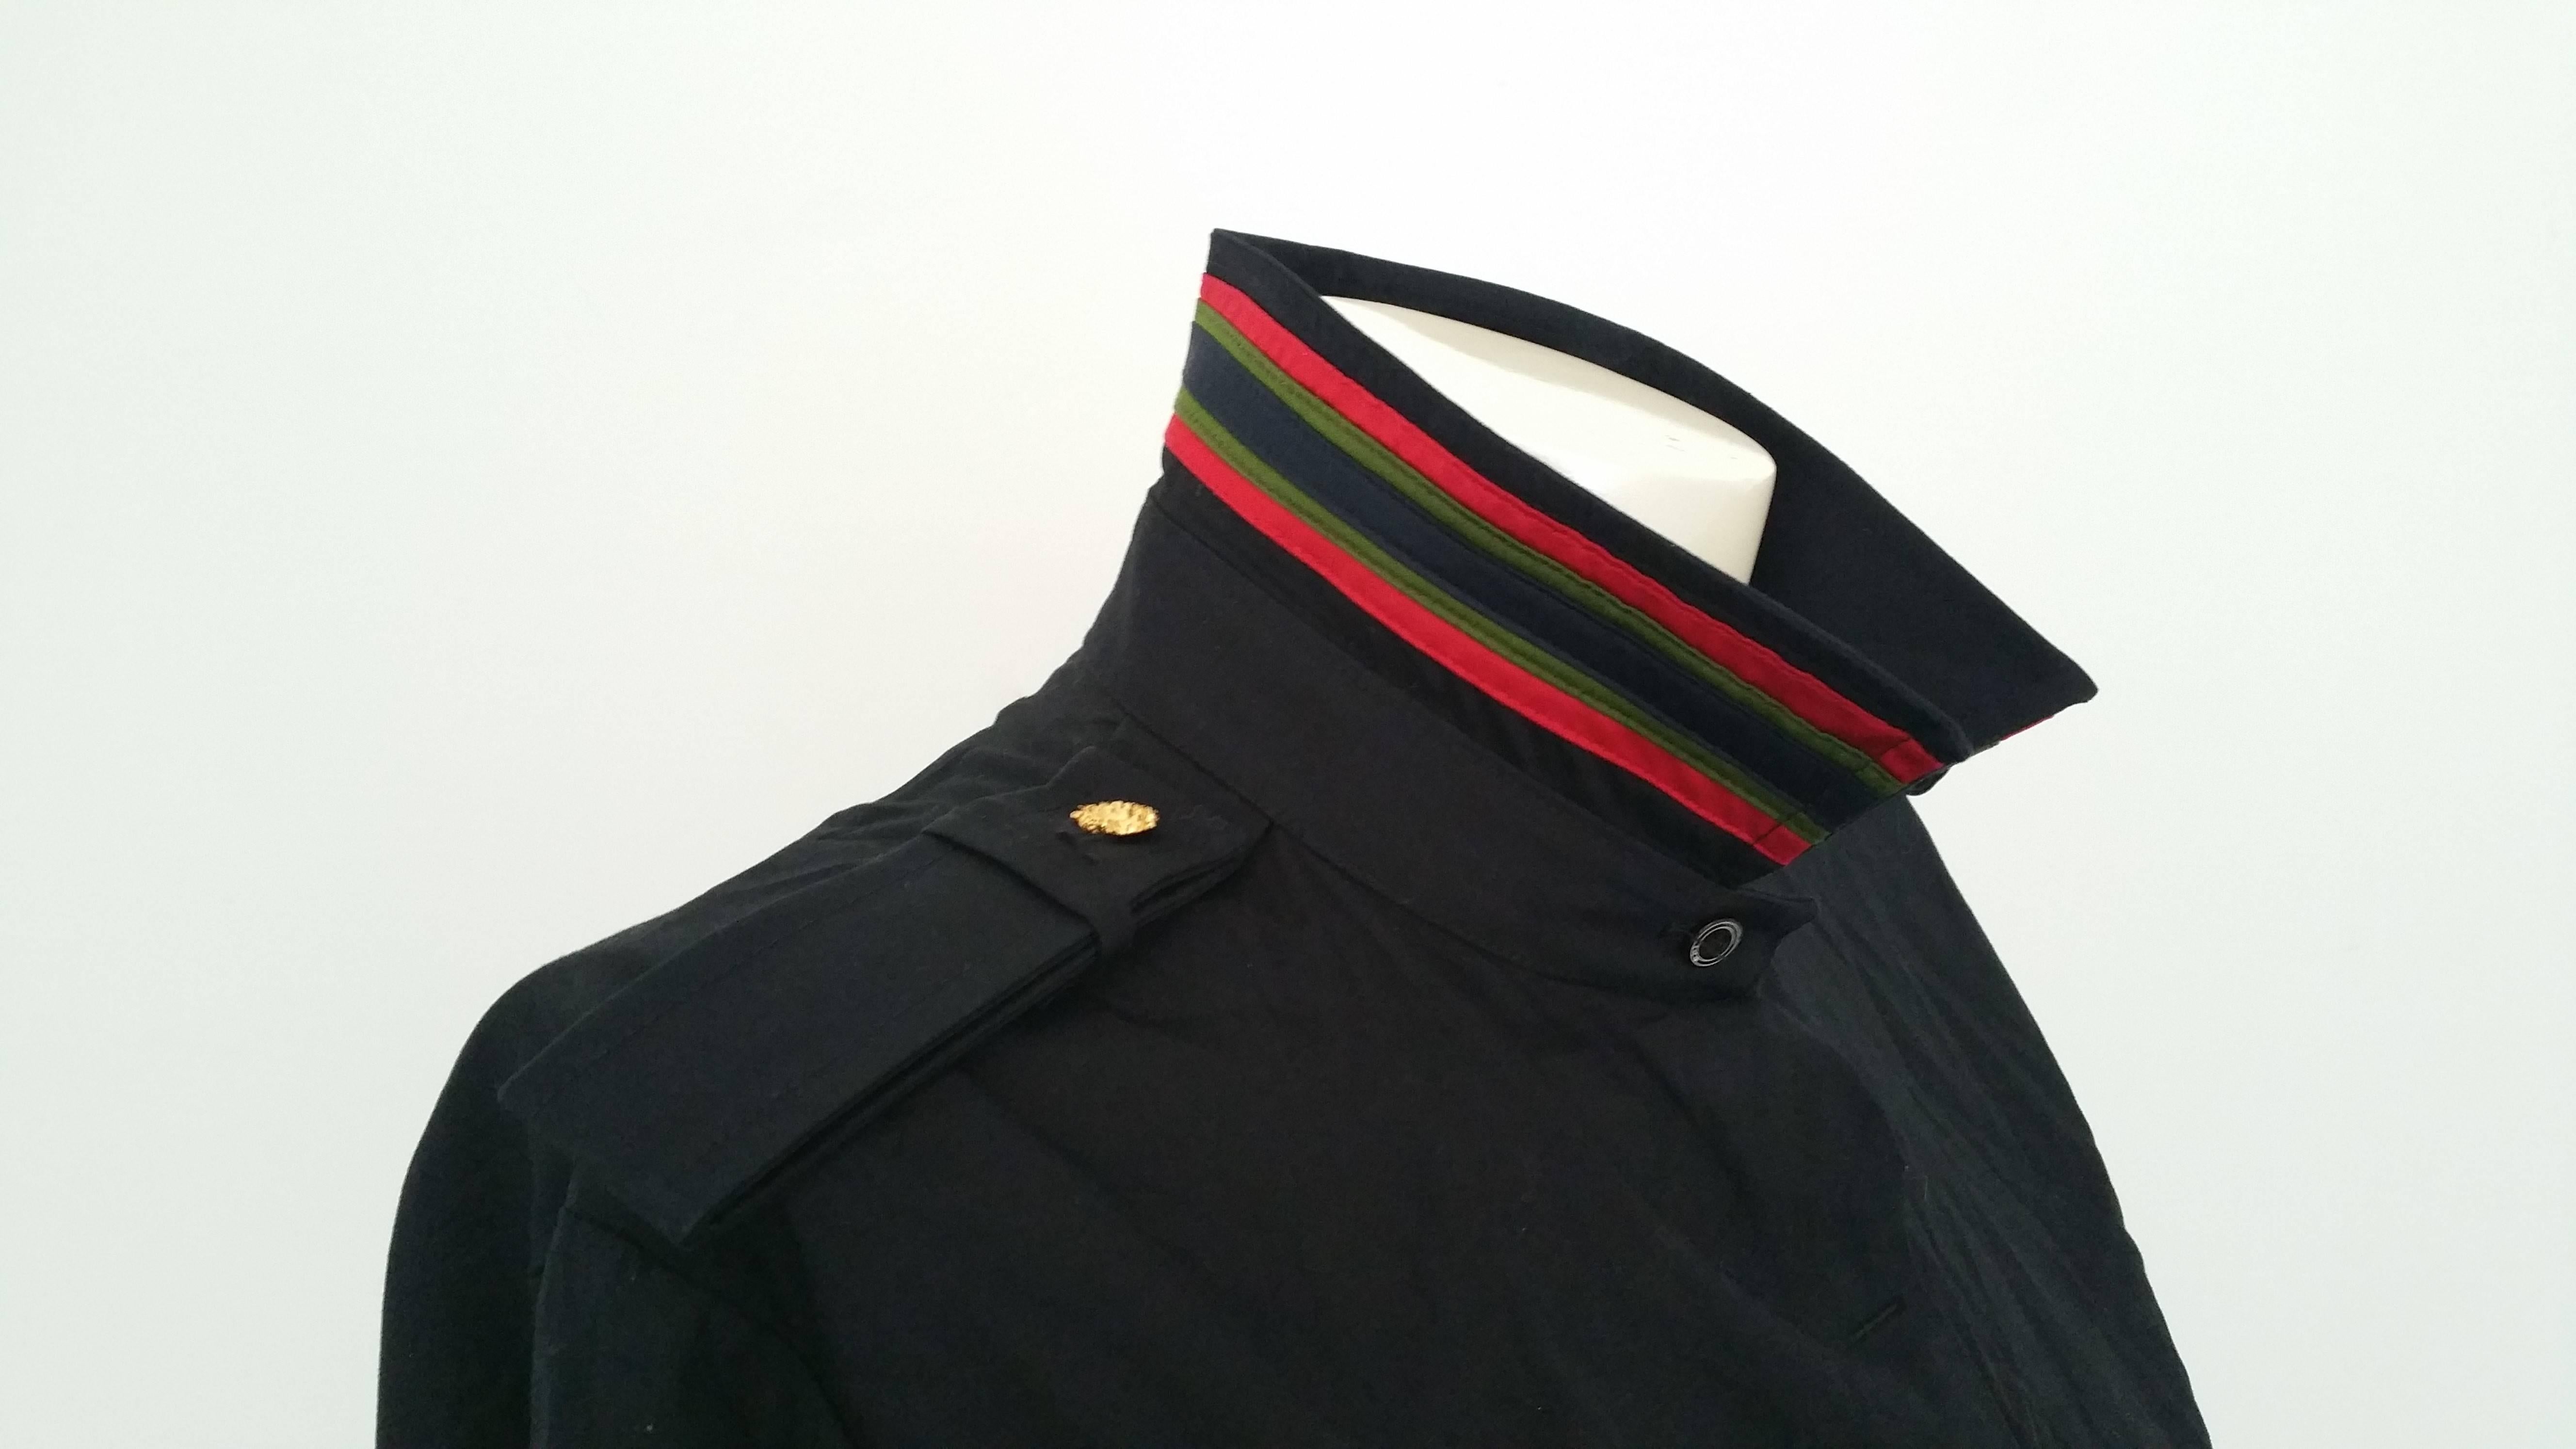 1970s Roberta Di camerino dark blu shirt still with tags

Military straps on both shoulder red and green collar 

Totally made in italy

Size:  44 italian size range